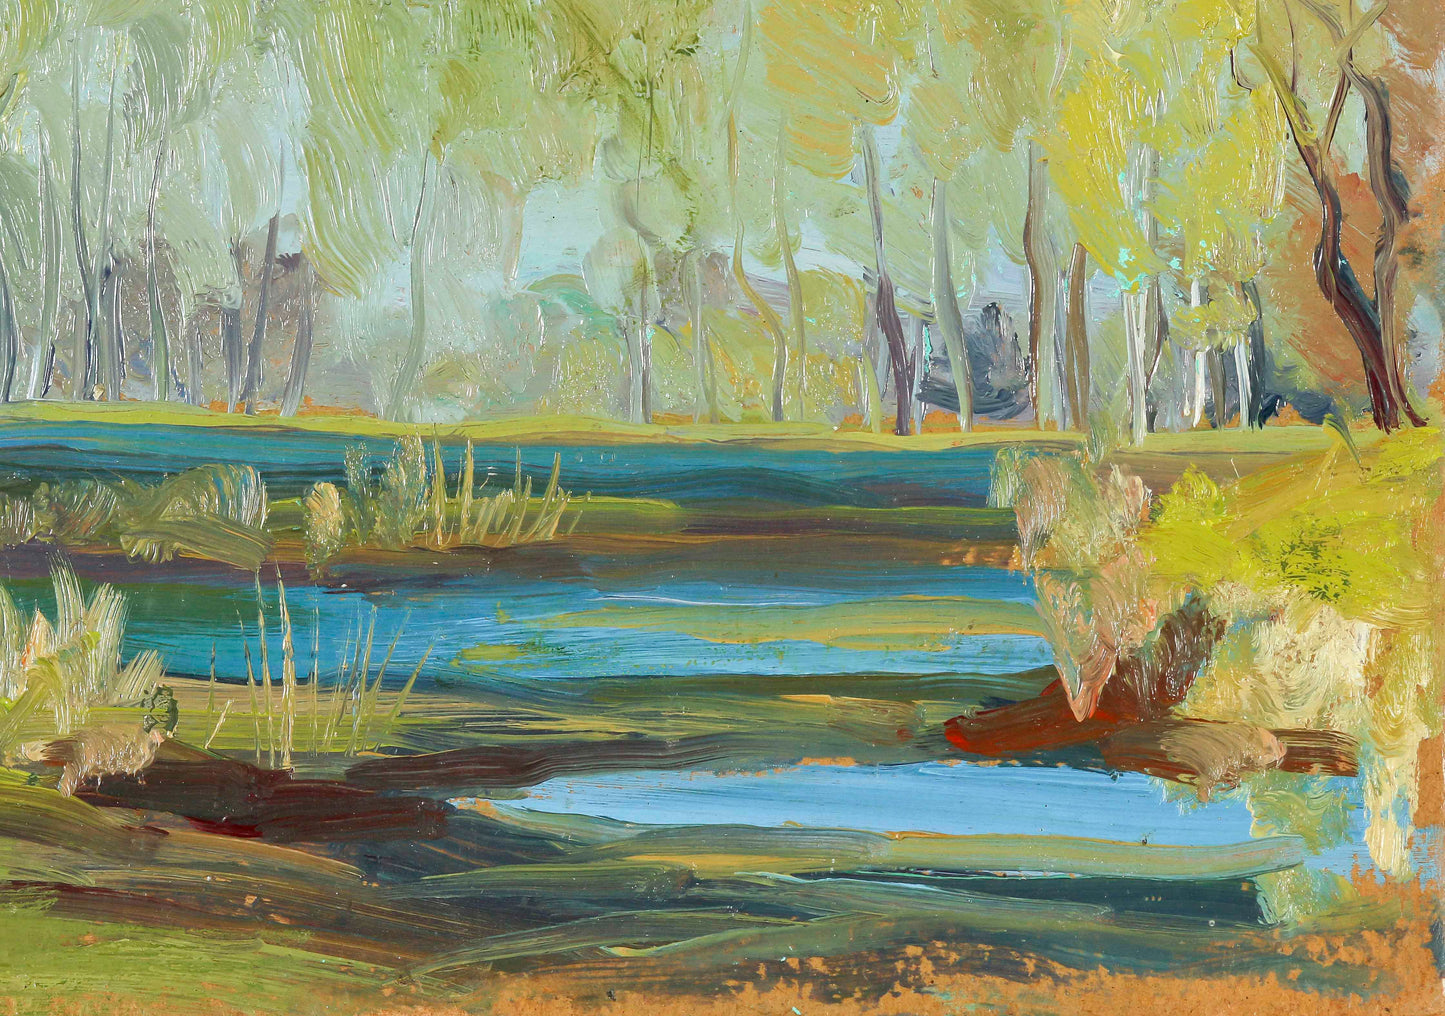 Oil painting depicting "The Swamp of Sorrow"